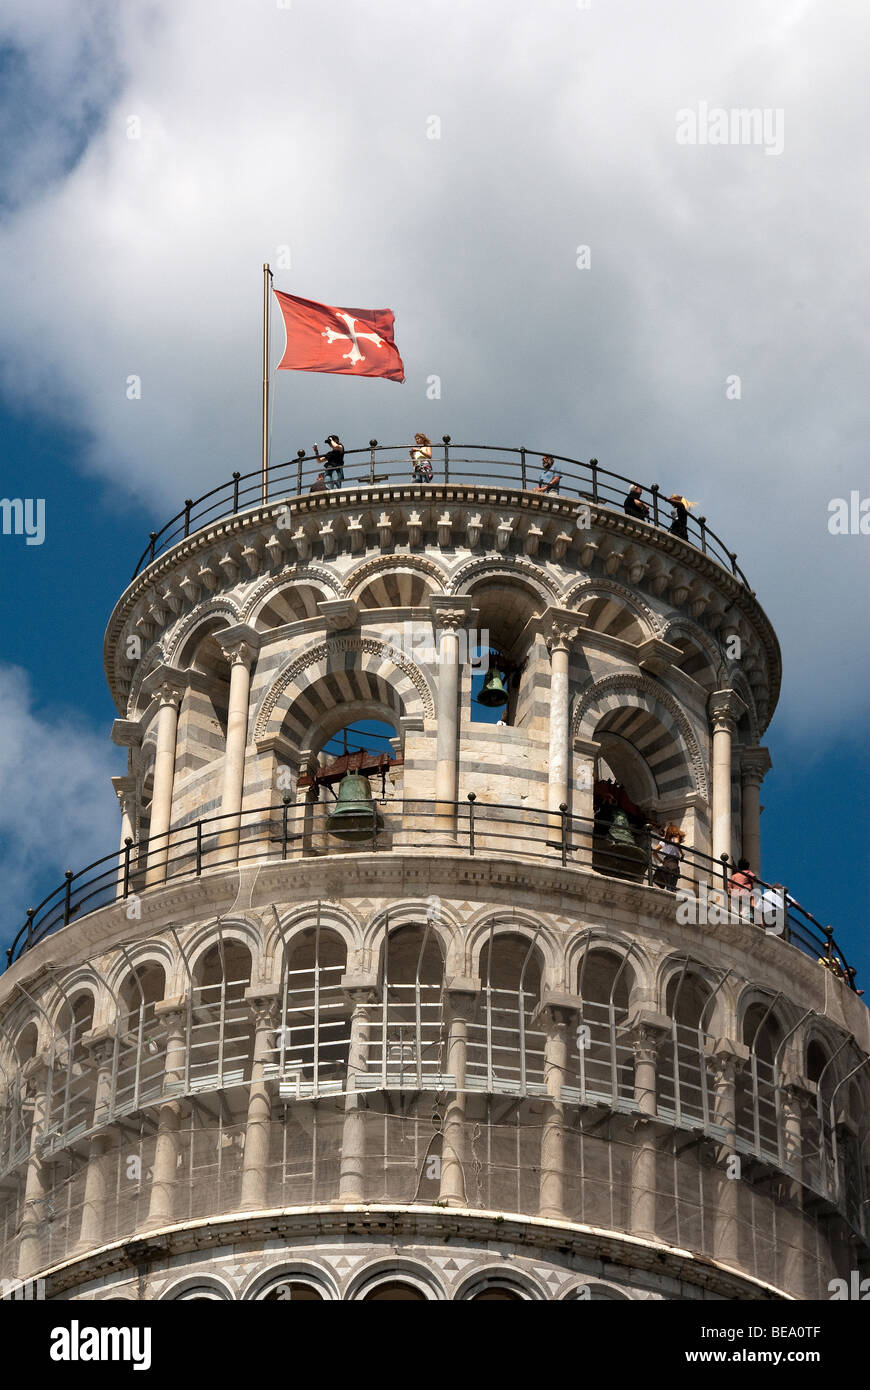 Tourists on top of the Leaning Tower of Pisa with red flag of Pisa with white Maltese Cross and sculpture of Cherubs Stock Photo